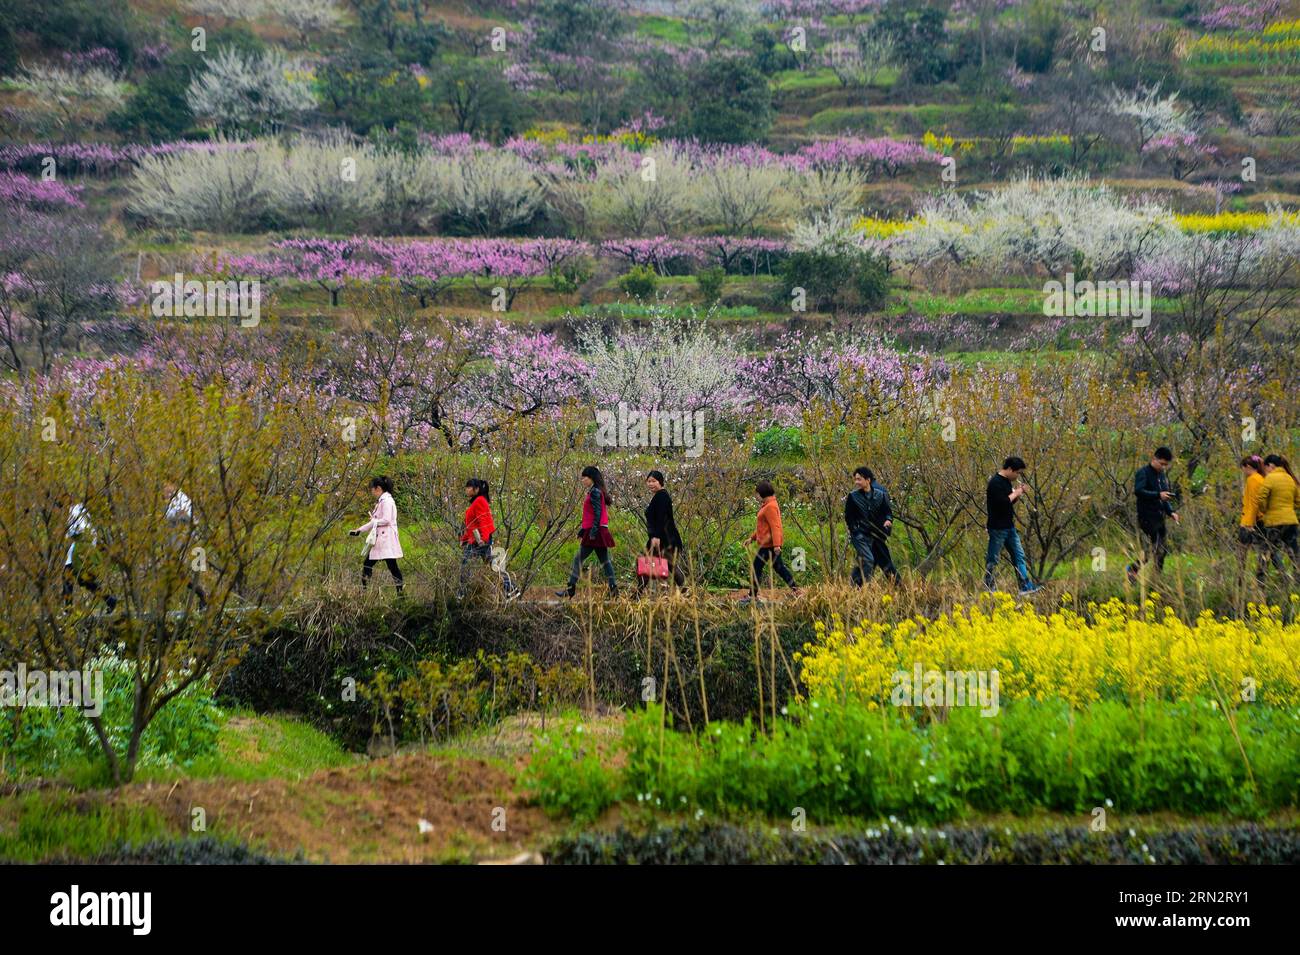 (150323) -- HANGZHOU, March 23, 2015 -- People visit the Yangshanfan Village in Tonglu County of Hangzhou City, capital of east China s Zhejiang Province, March 23, 2015. Various flowers blossom during Spring in Tonglu, attracting tourists to visit the County and promoting the local tourism. ) (zwx) CHINA-HANGZHOU-TONGLU-TOURISM(CN) XuxYu PUBLICATIONxNOTxINxCHN   Hangzhou March 23 2015 Celebrities Visit The  Village in Tonglu County of Hangzhou City Capital of East China S Zhejiang Province March 23 2015 Various Flowers Blossom during Spring in Tonglu Attracting tourists to Visit The County an Stock Photo